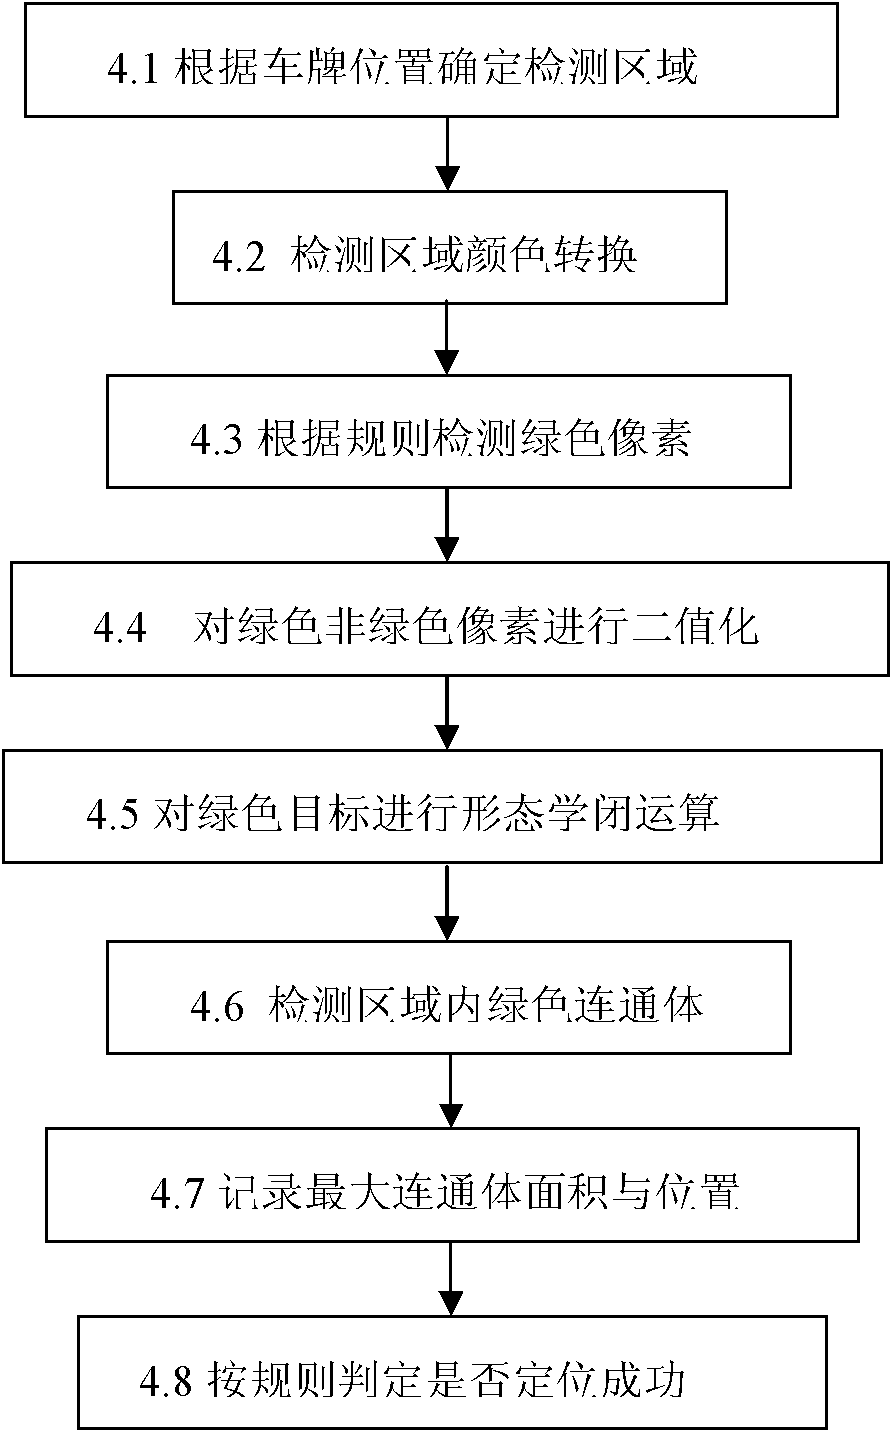 Method for identifying green mark of taxi